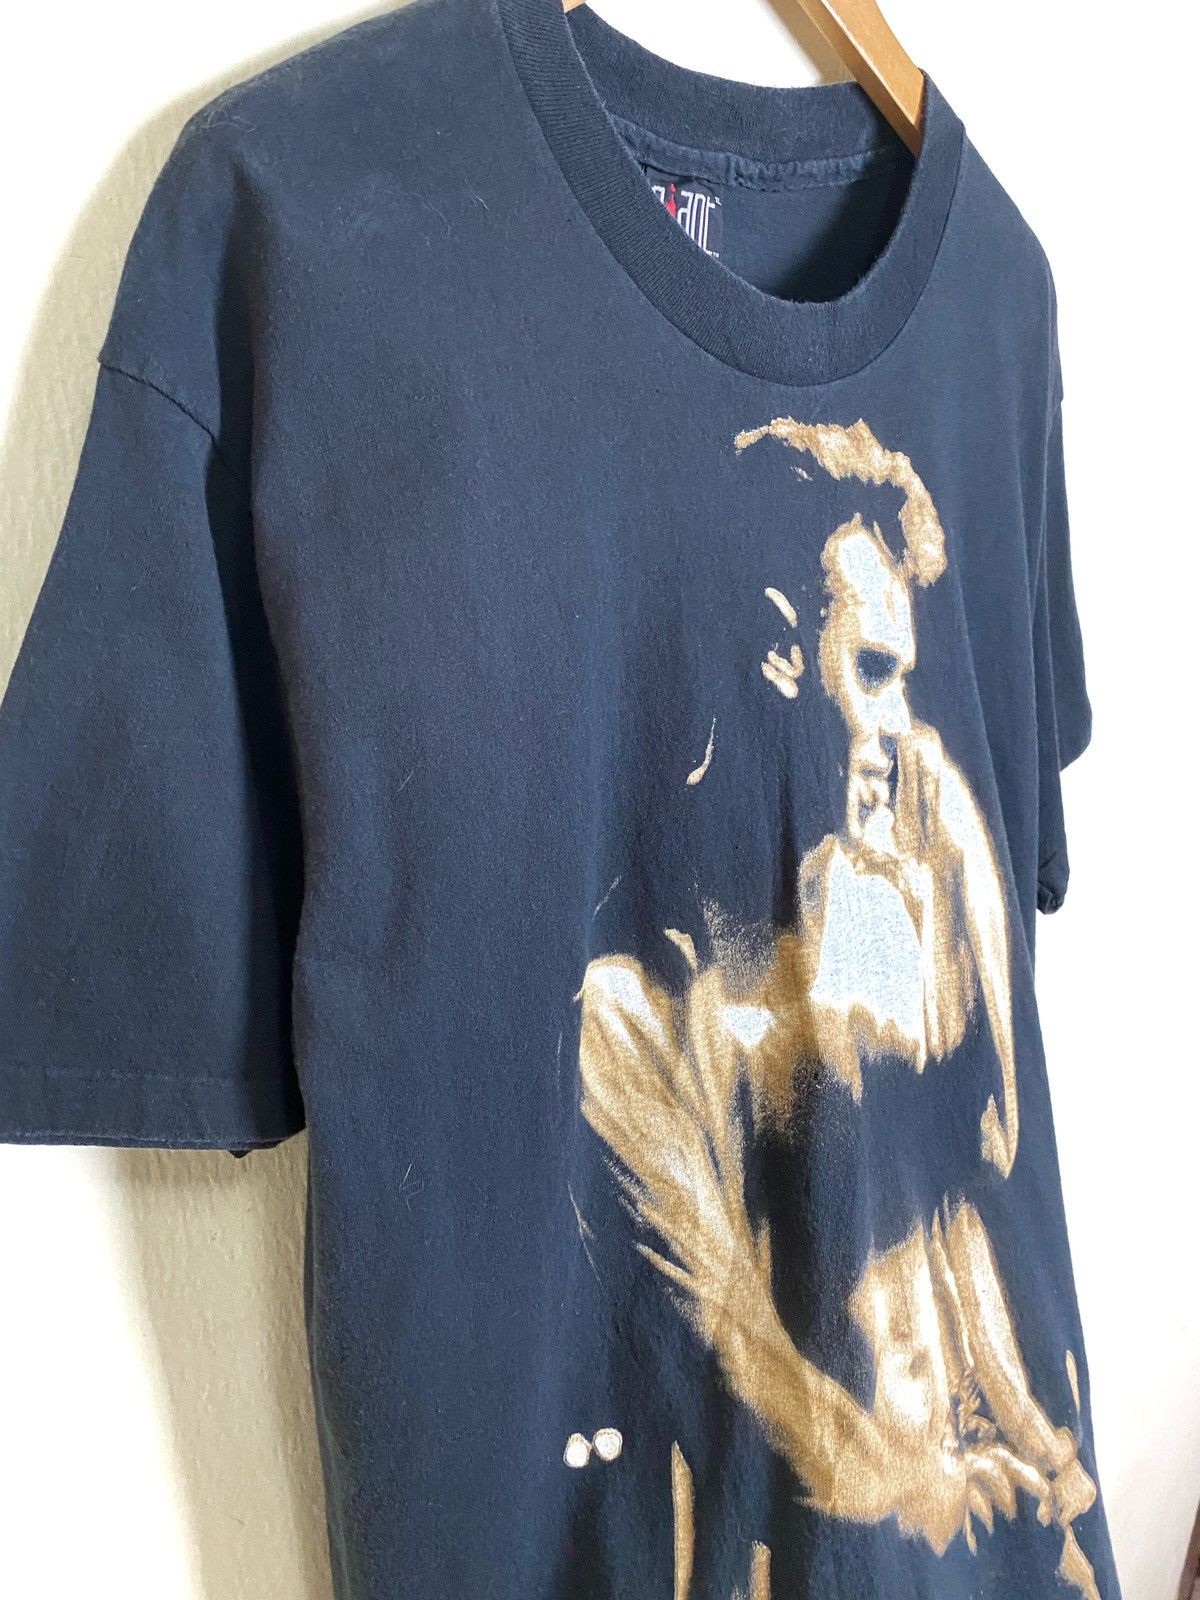 Rare🔥Vintage 90s Morissey Your Arsenal The Smiths Tshirt - 3